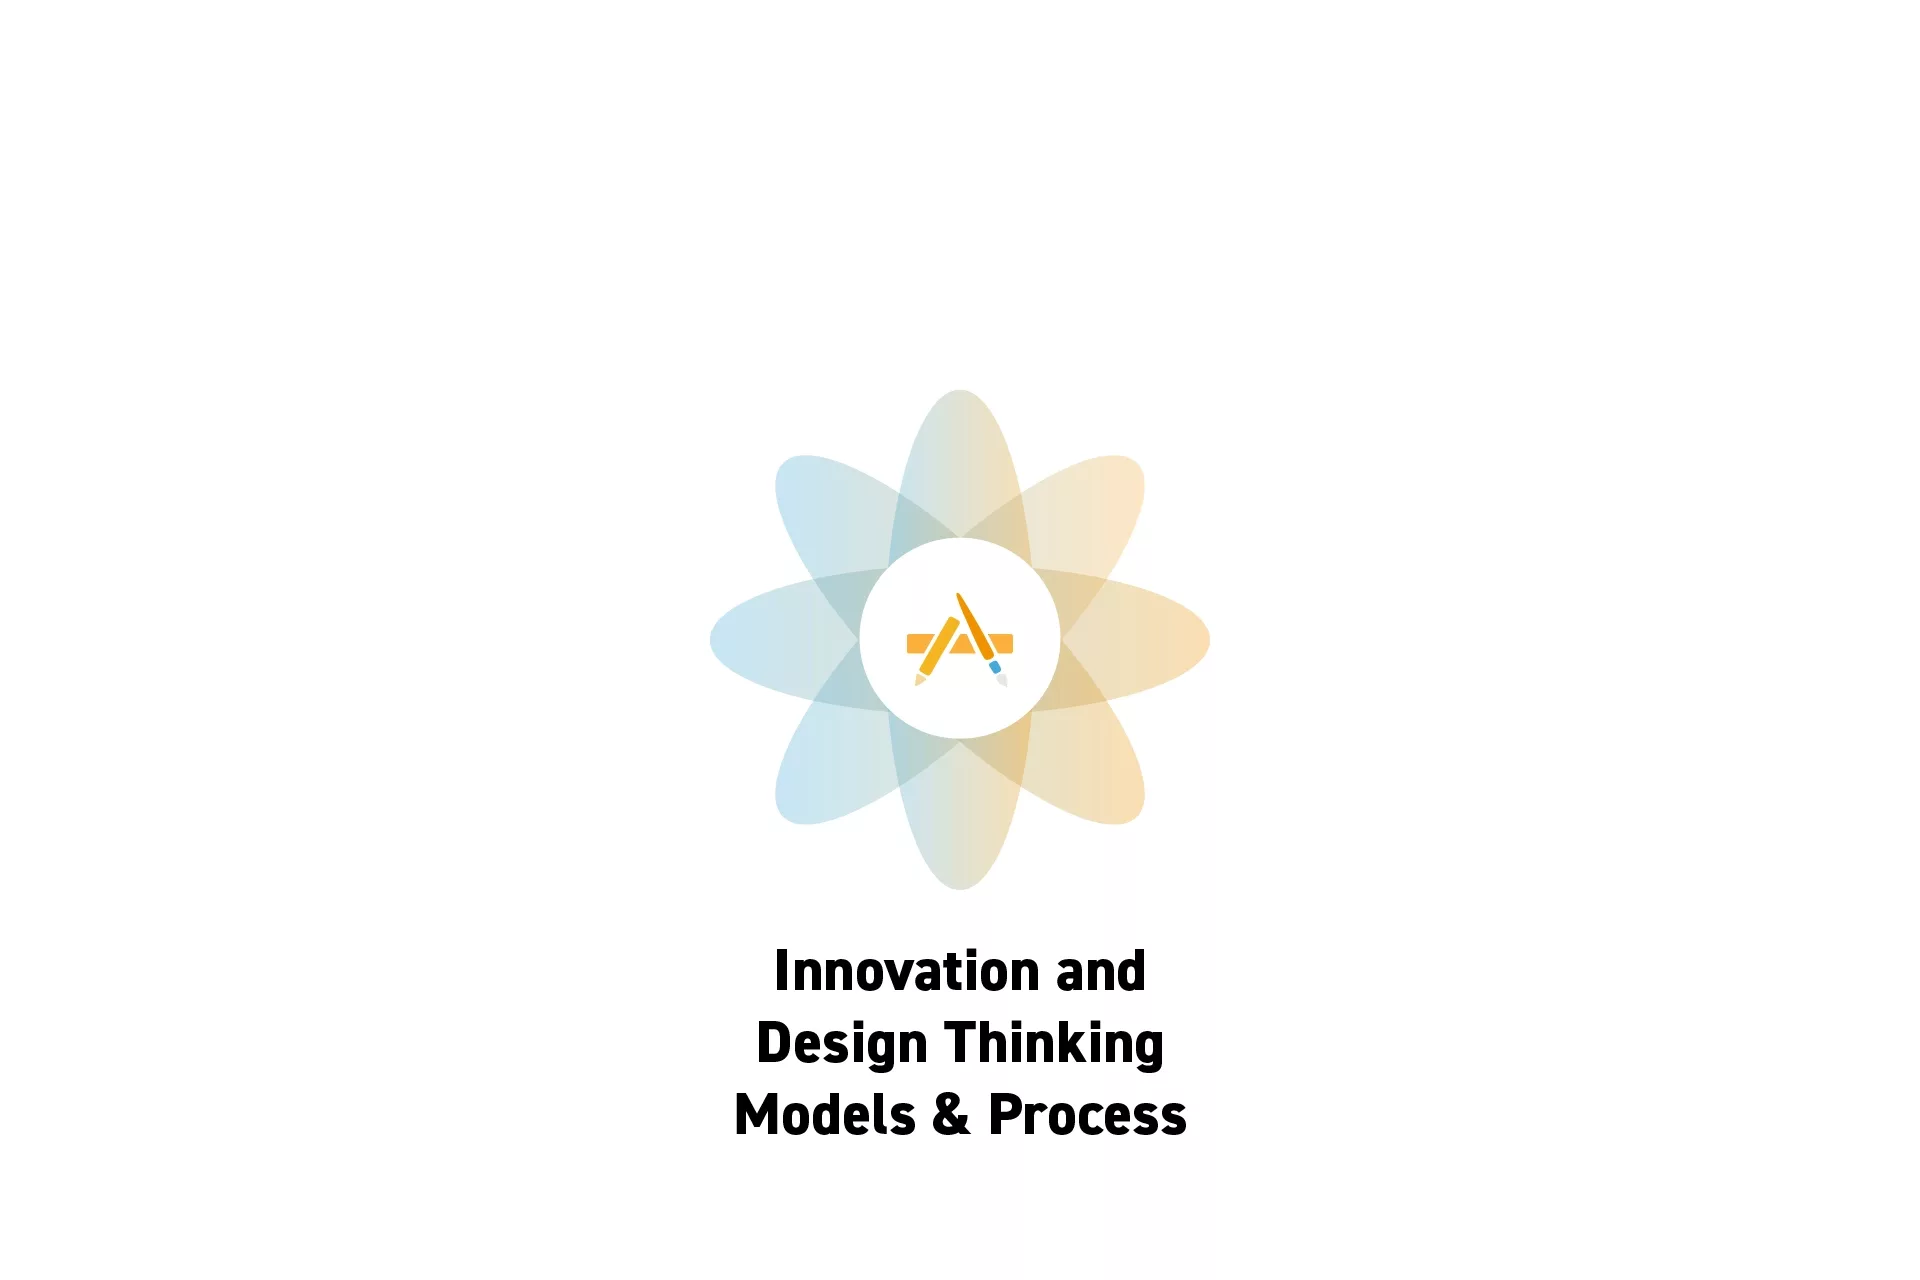 A flower that represents Digital Craft with the text “Innovation and Design Thinking Models &amp; Process” beneath it.